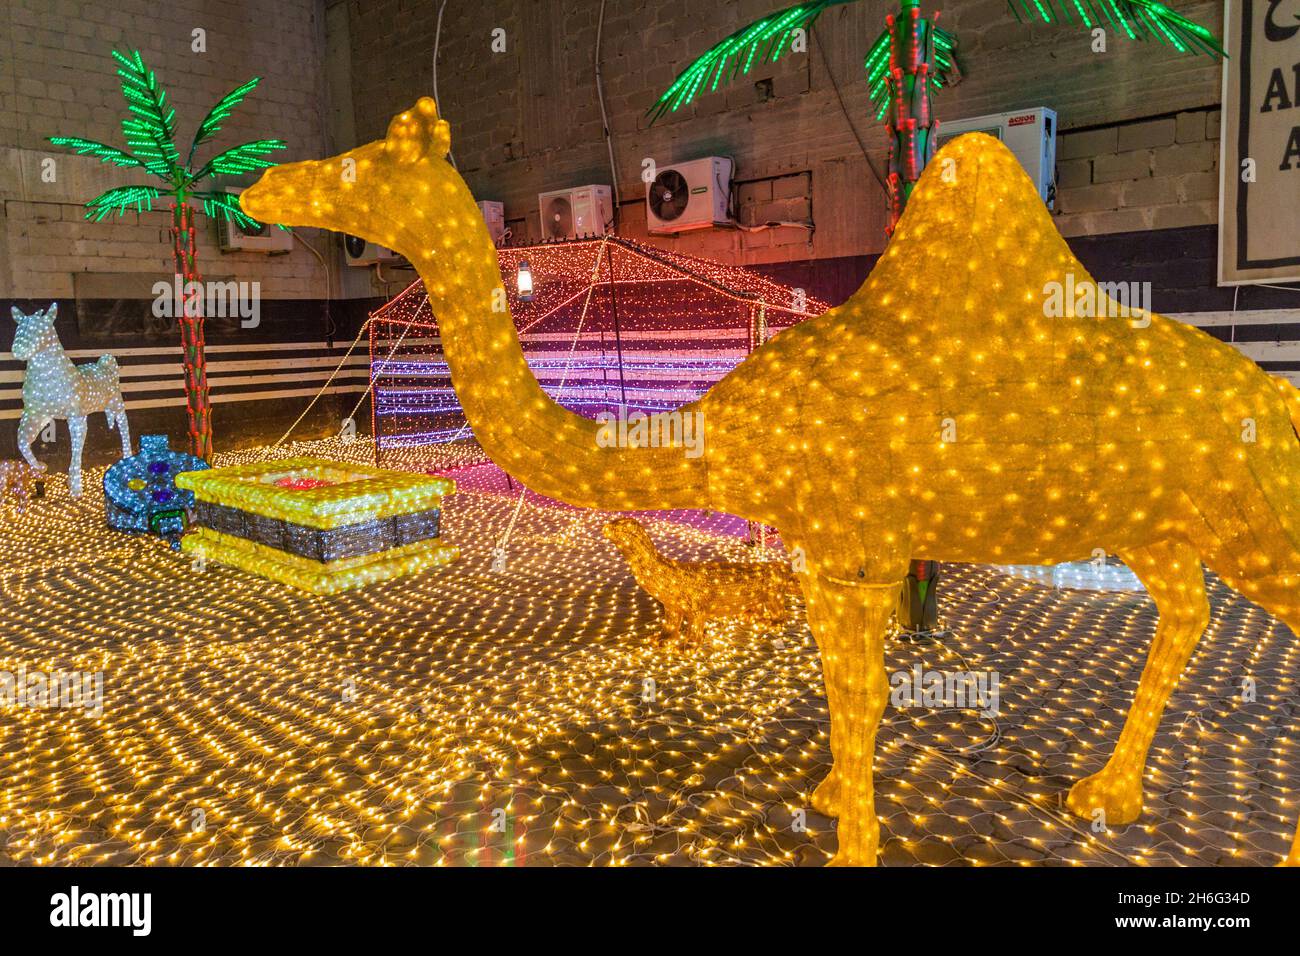 KUWAIT CITY, KUWAIT - MARCH 17, 2017: Sculptures of plants and animals at the central Souq in Kuwait City Stock Photo